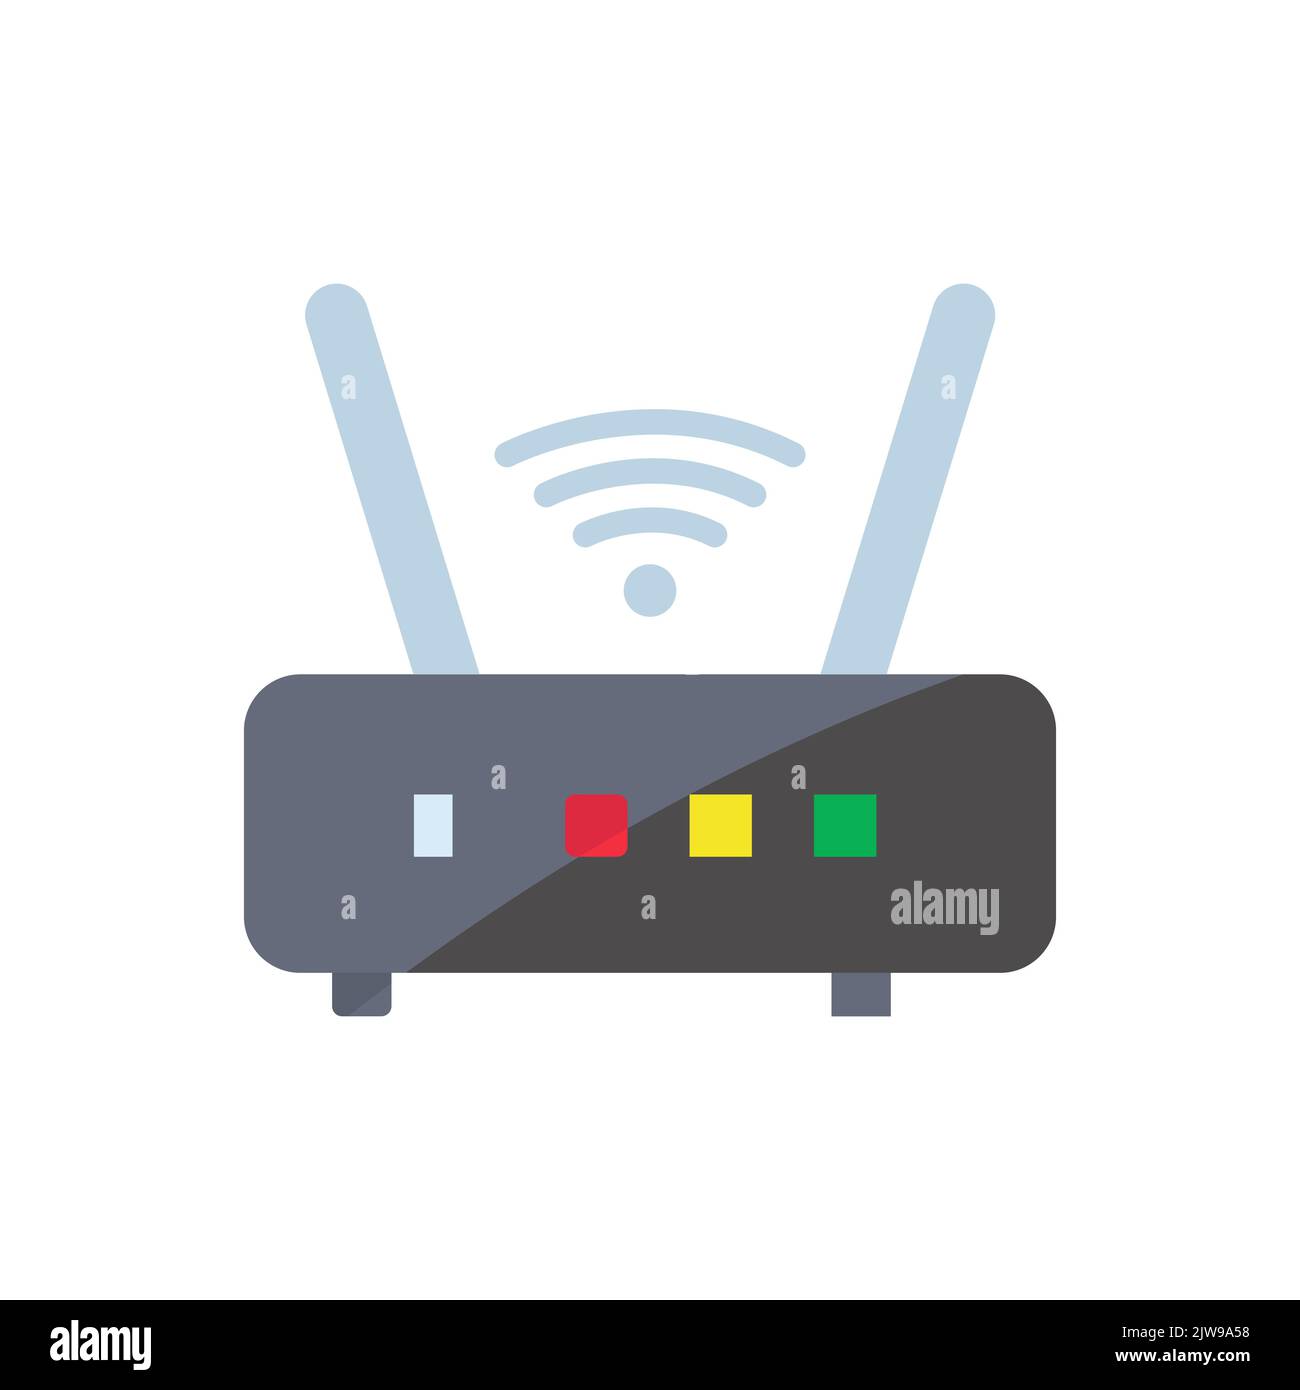 Wireless icon, access point. Icon related to electronic, technology. Flat icon style. Simple design editable Stock Vector